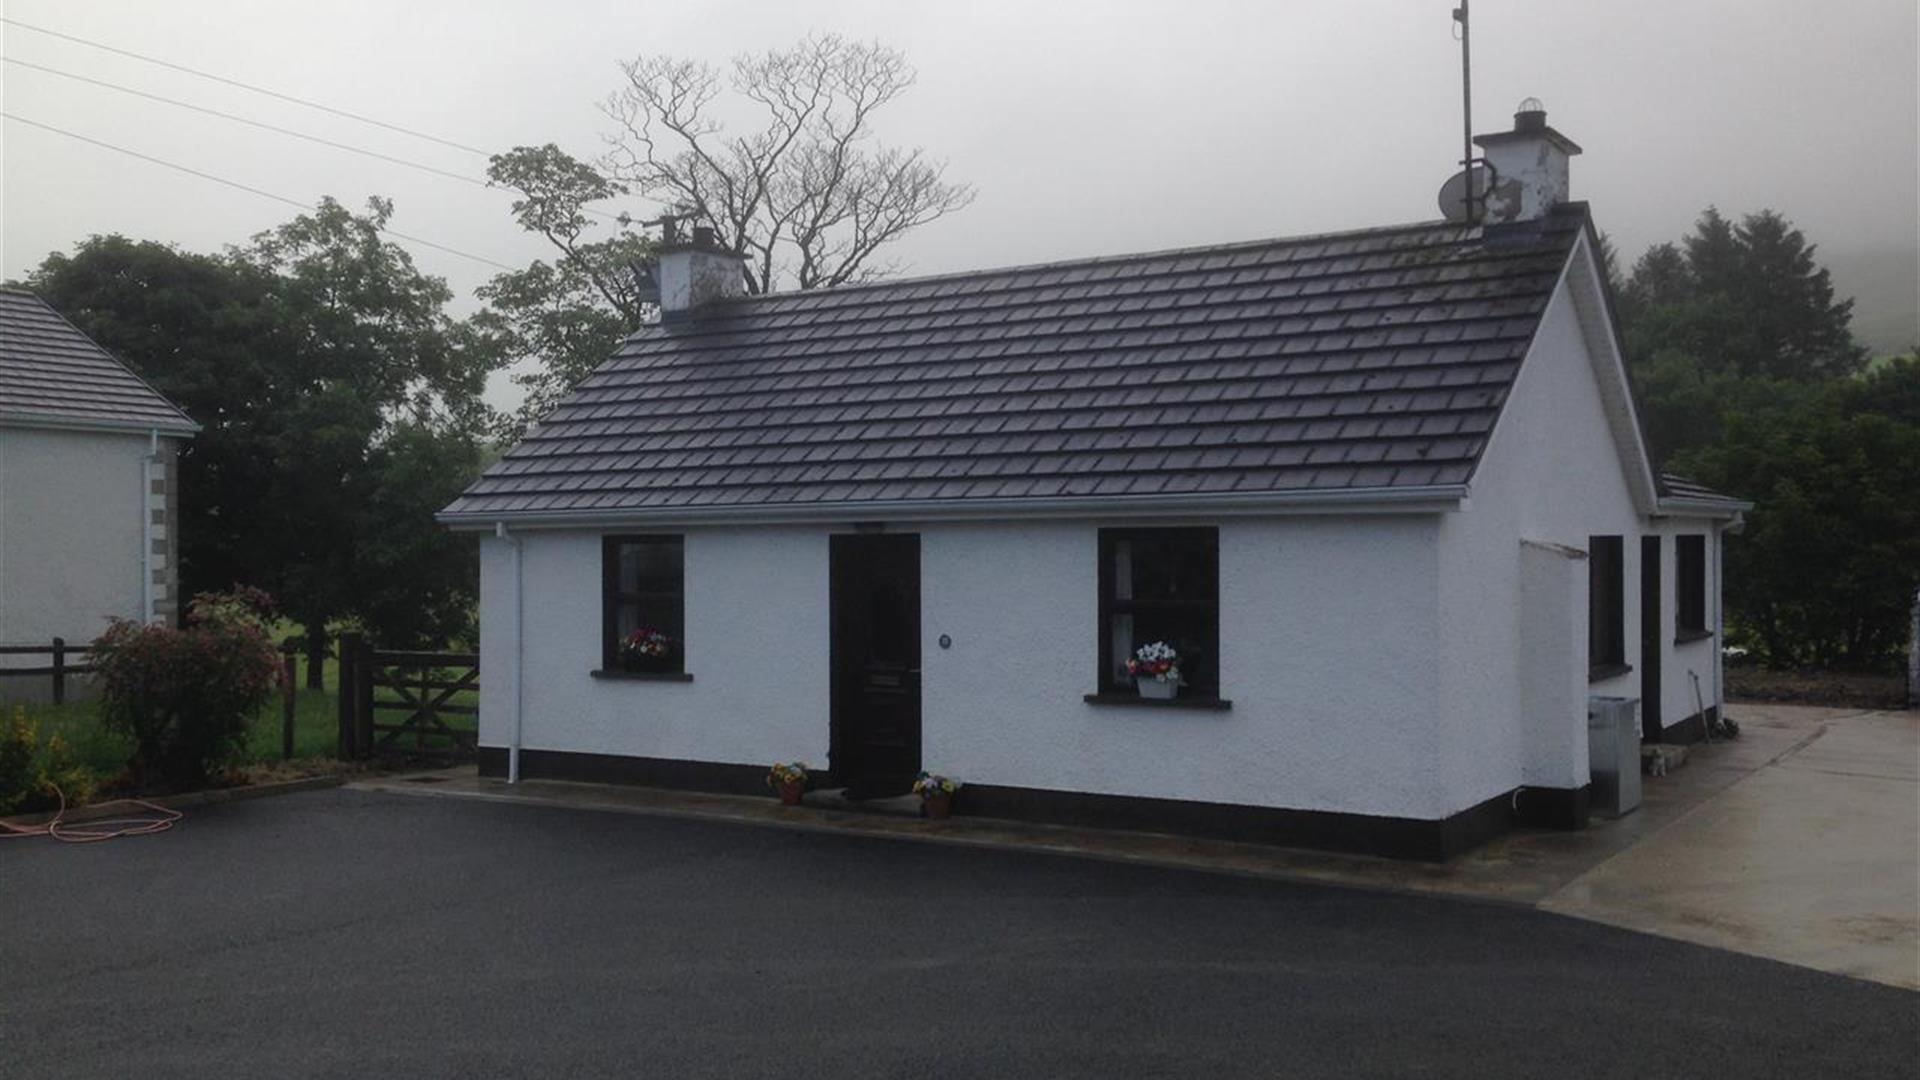 Glenelly Road Self Catering